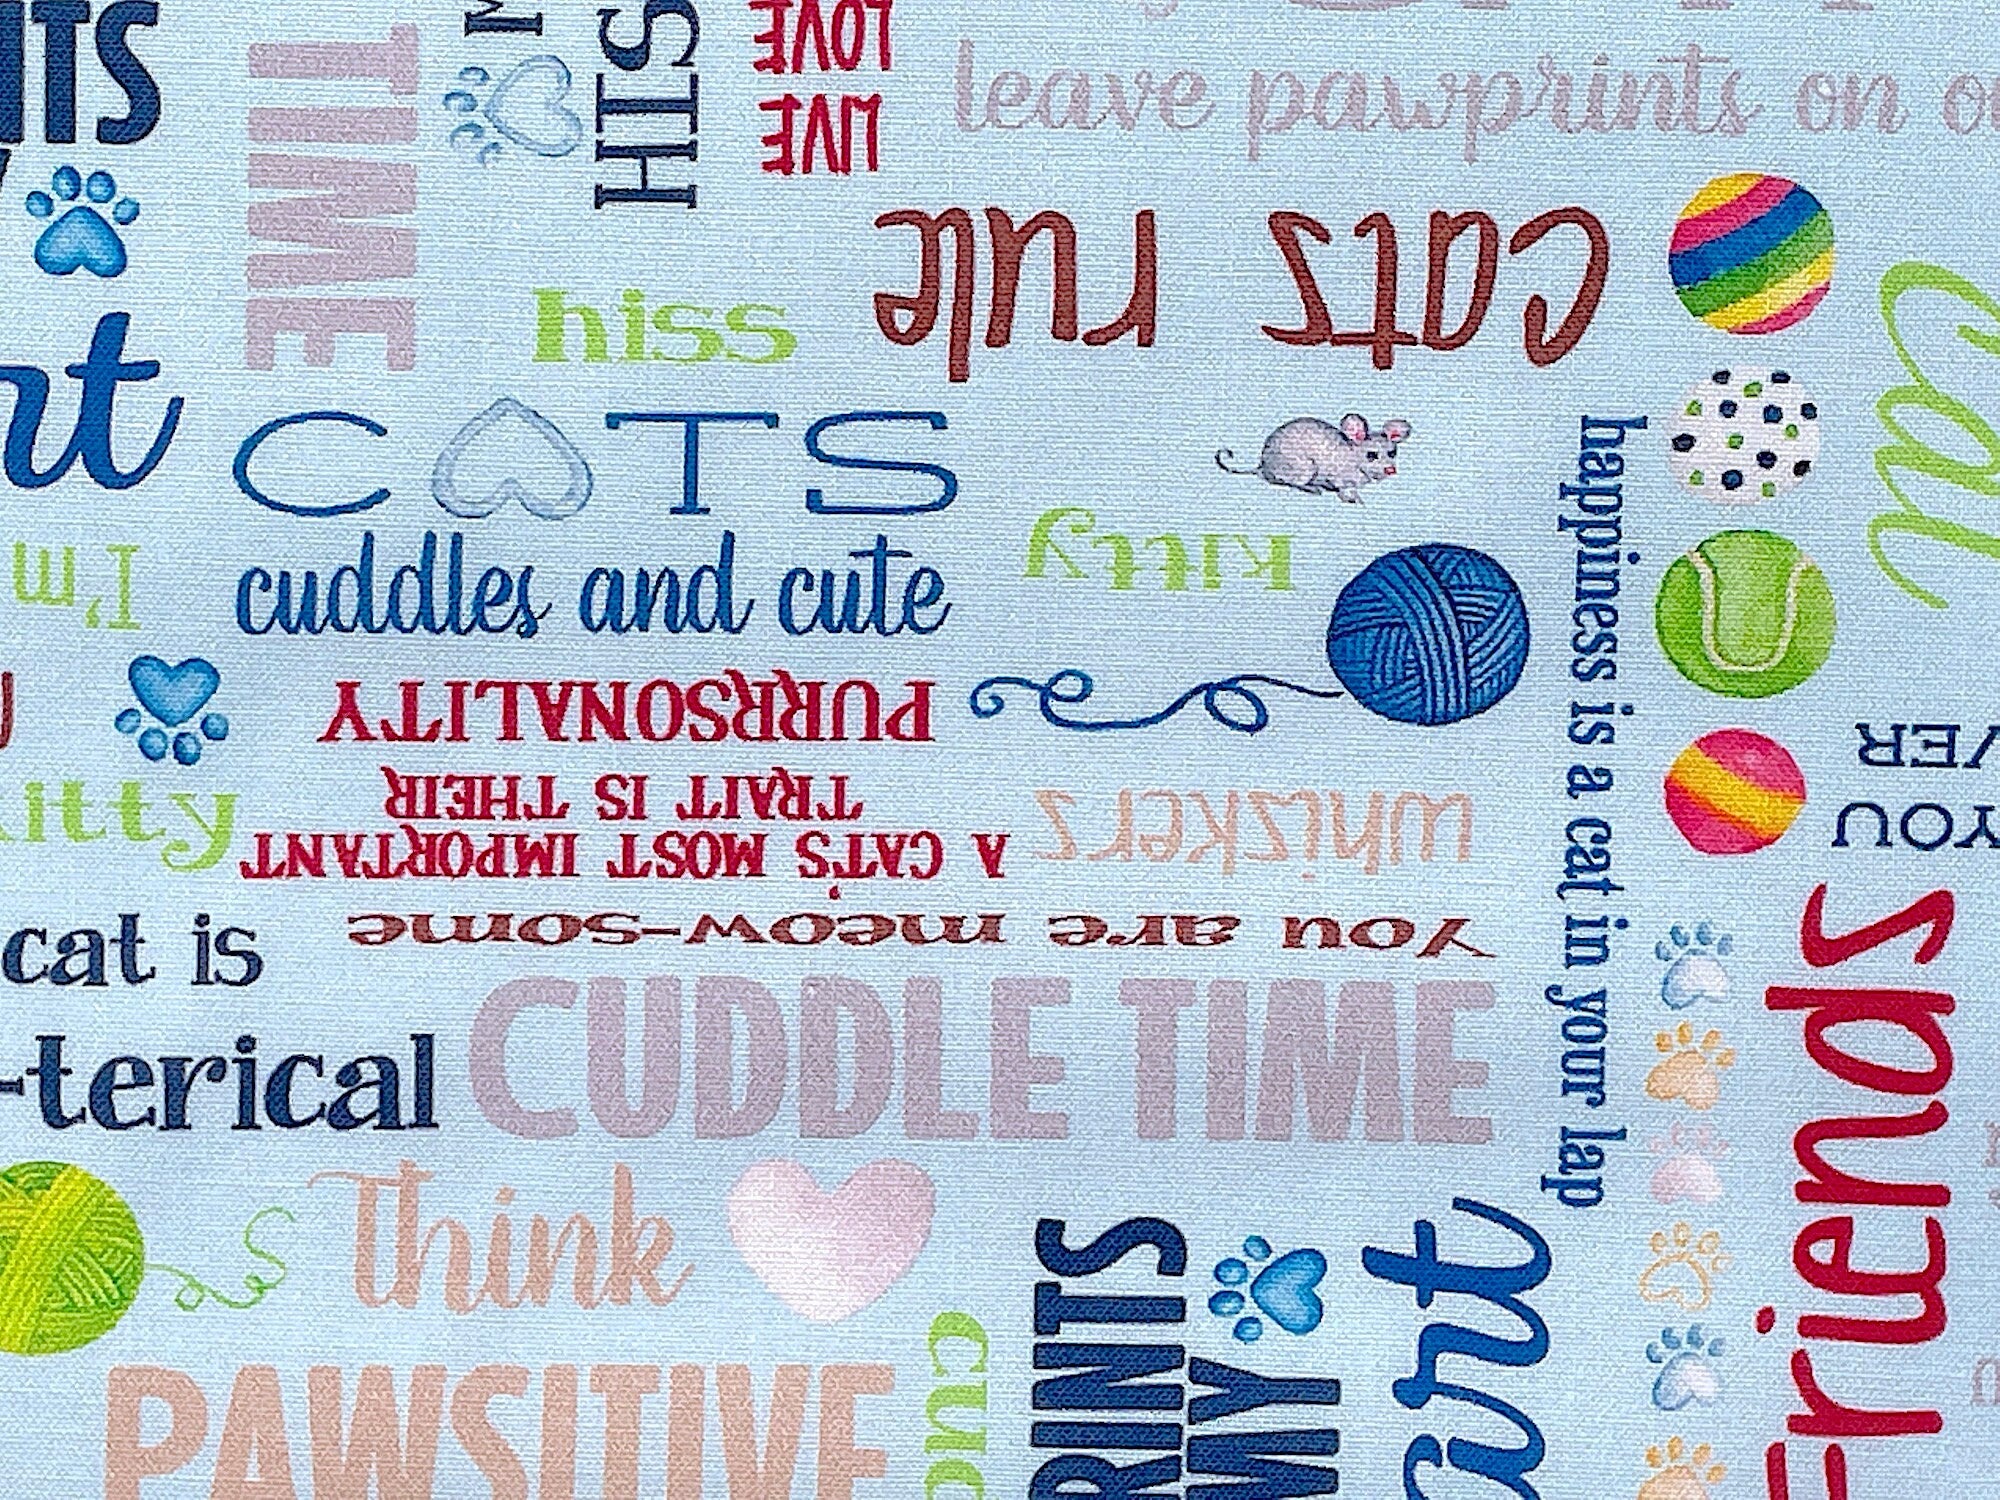 Close up of sayings such as cats rule, cuddles and cute, cuddle time and more.